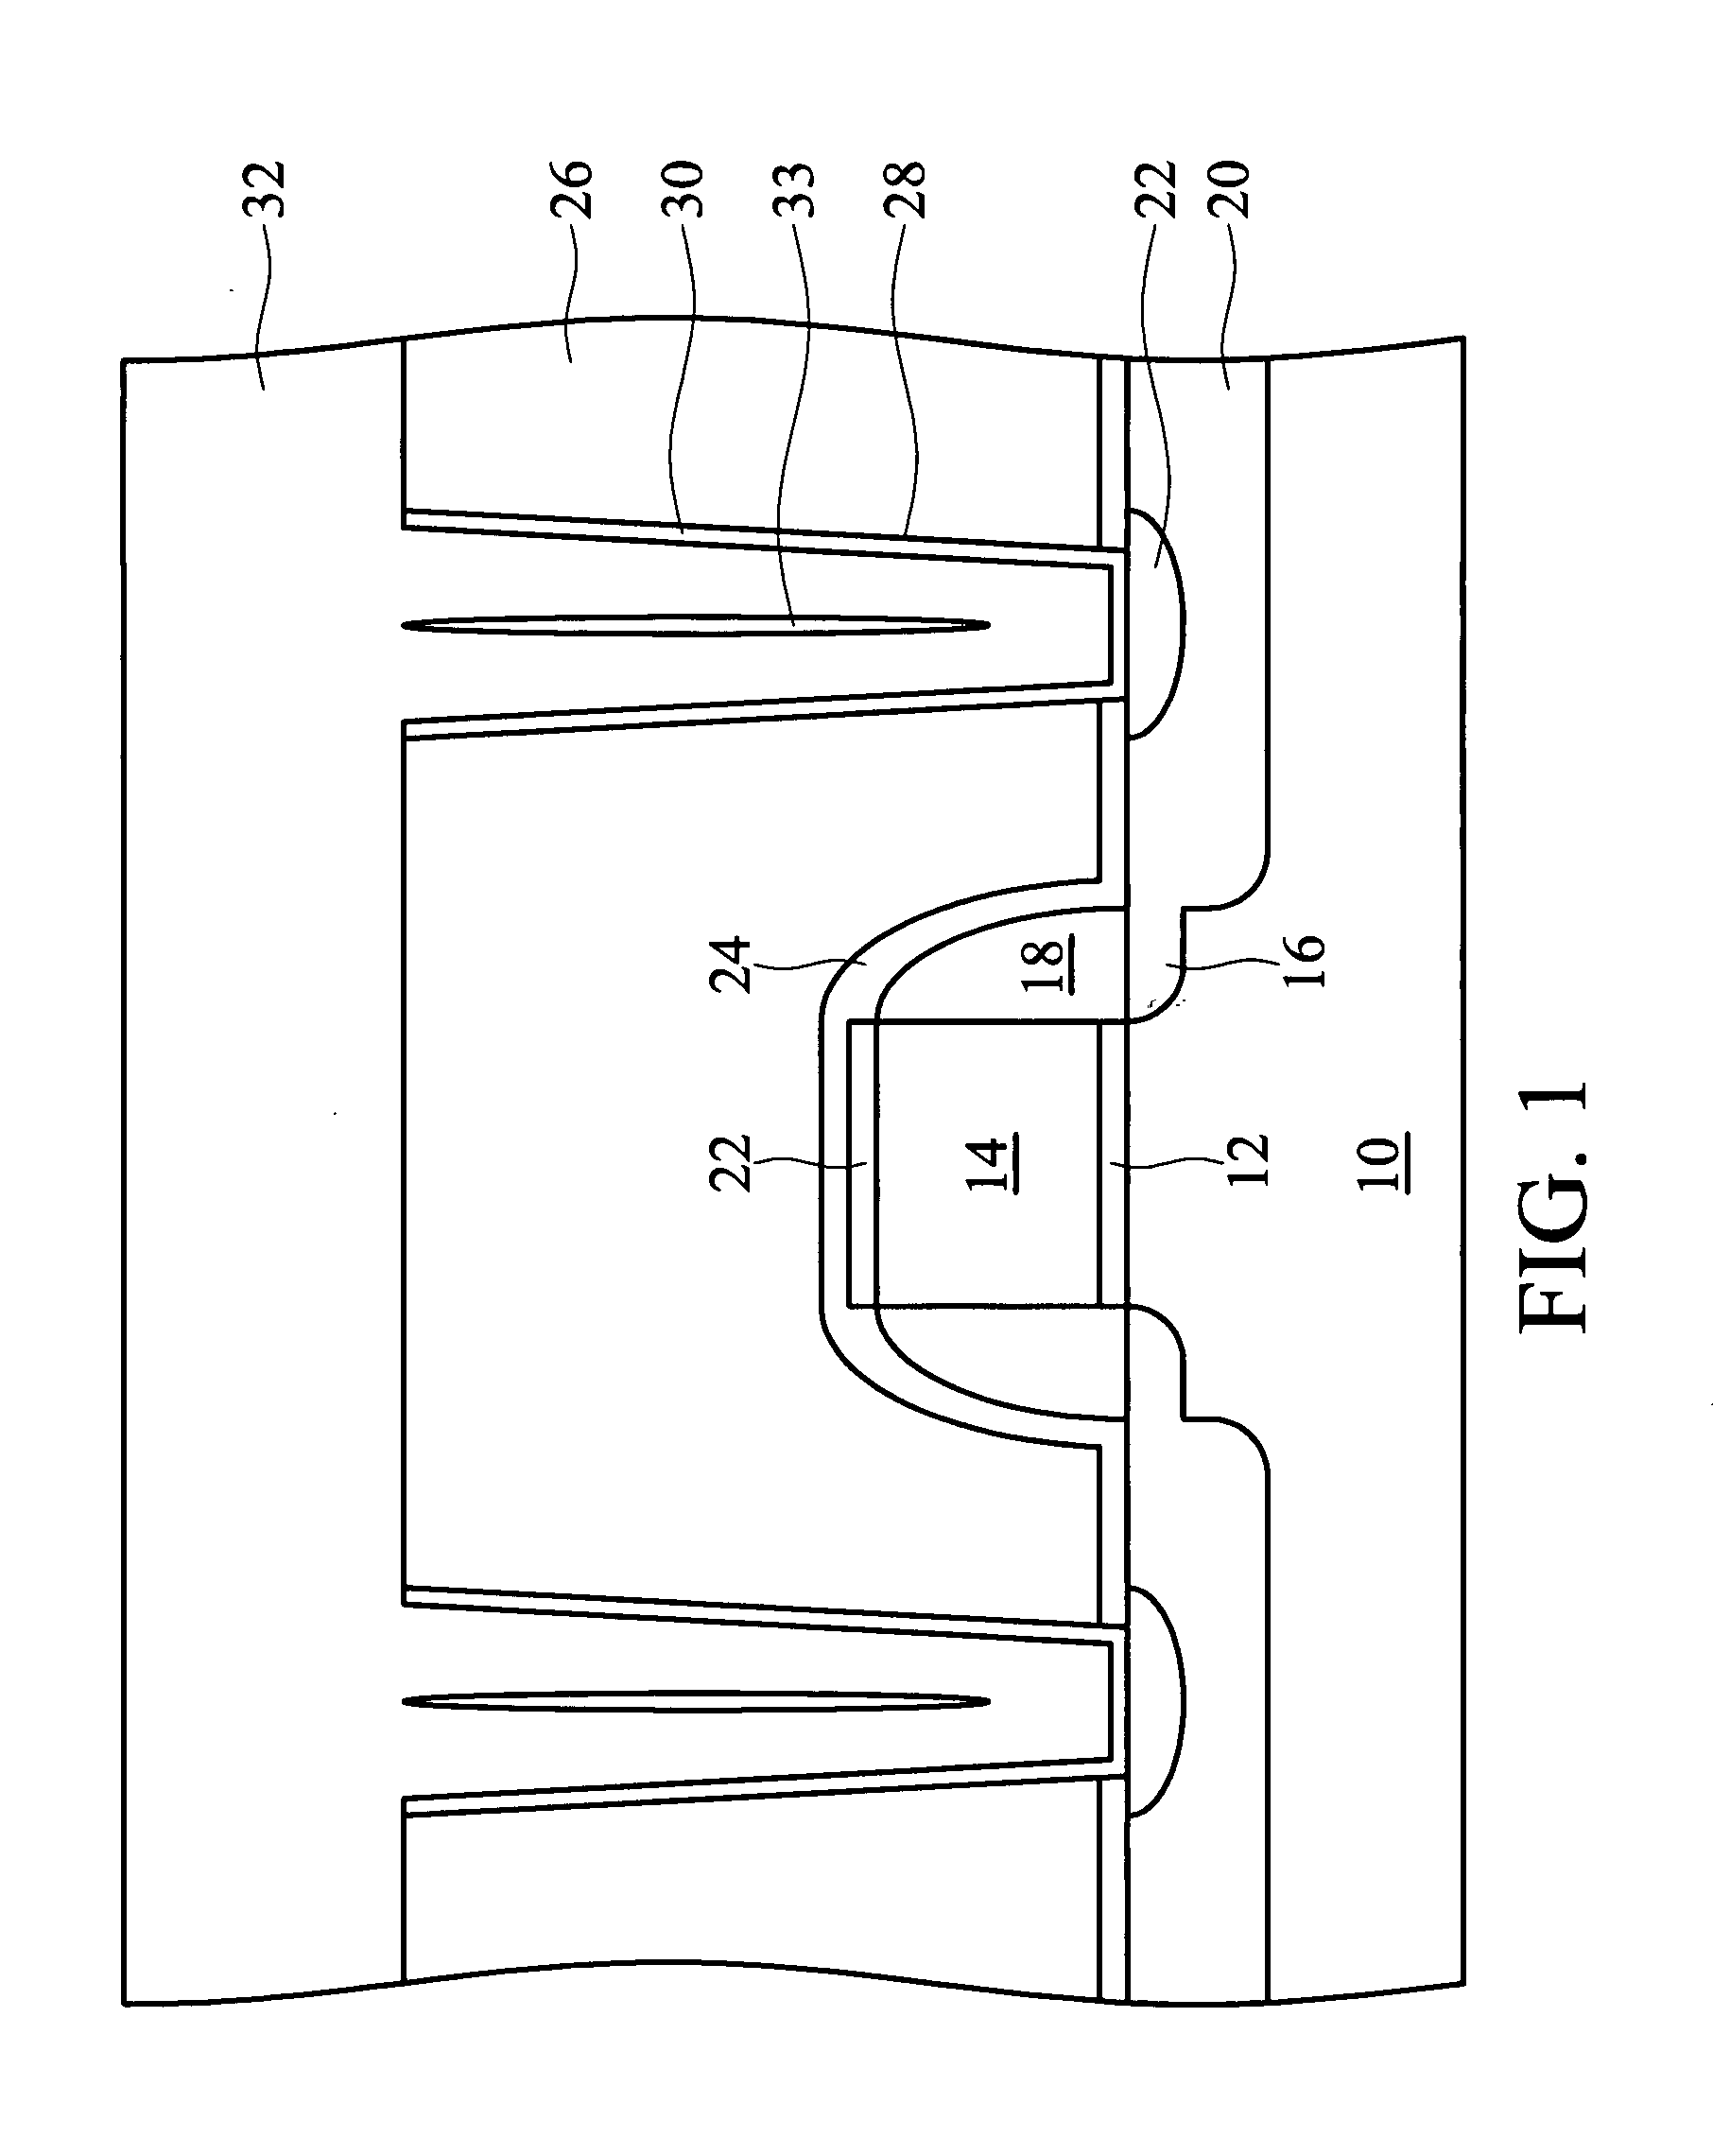 Method of forming contact plugs for eliminating tungsten seam issue